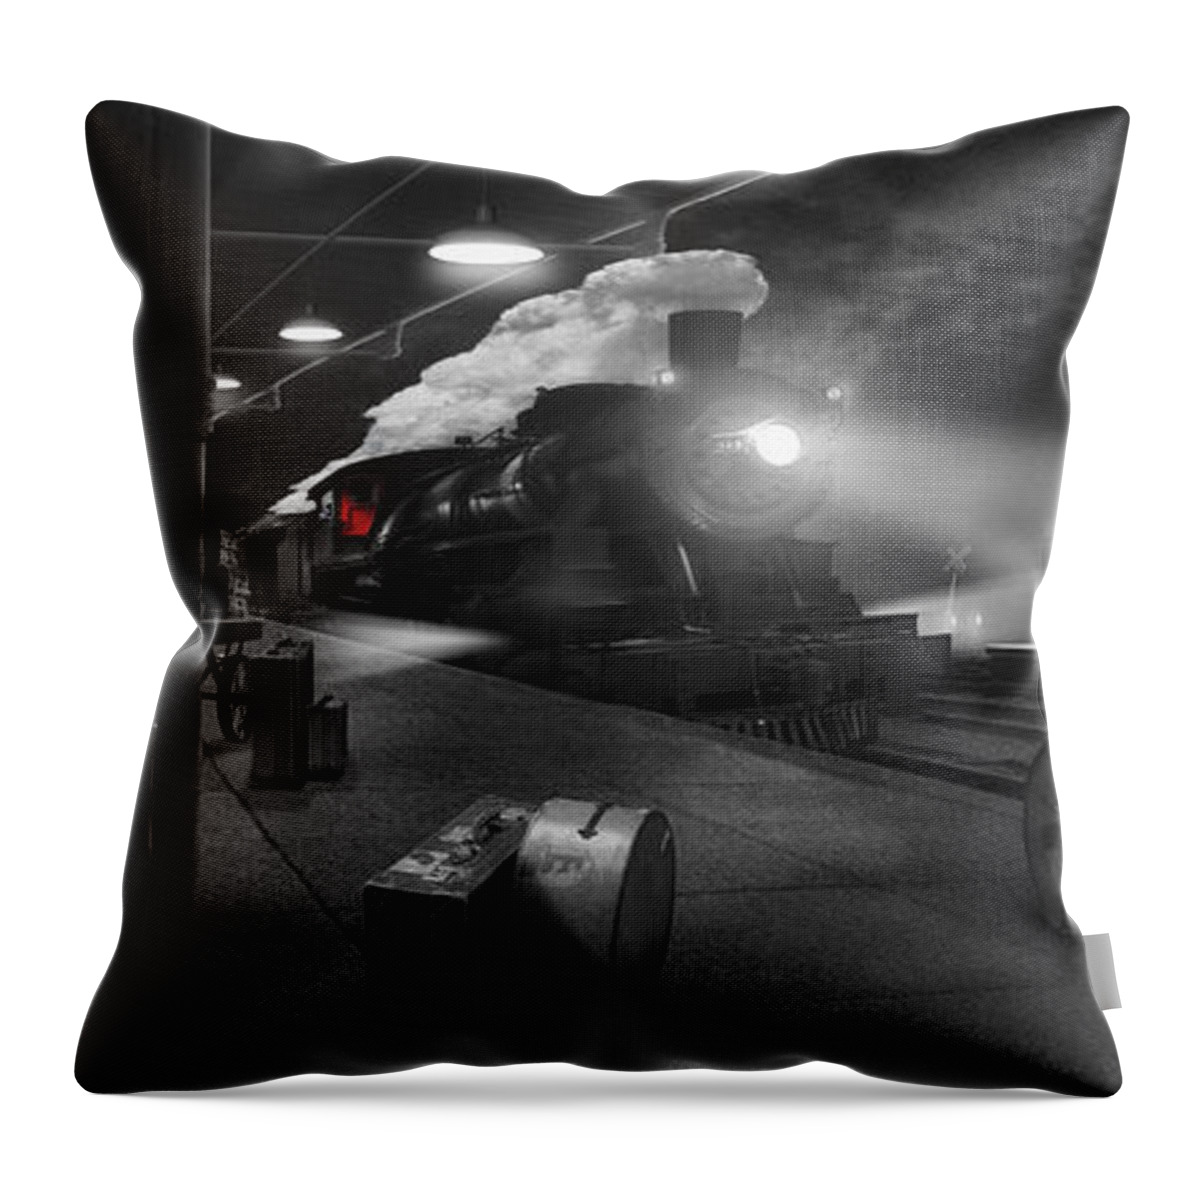 Transportation Throw Pillow featuring the photograph The Station - Panoramic by Mike McGlothlen